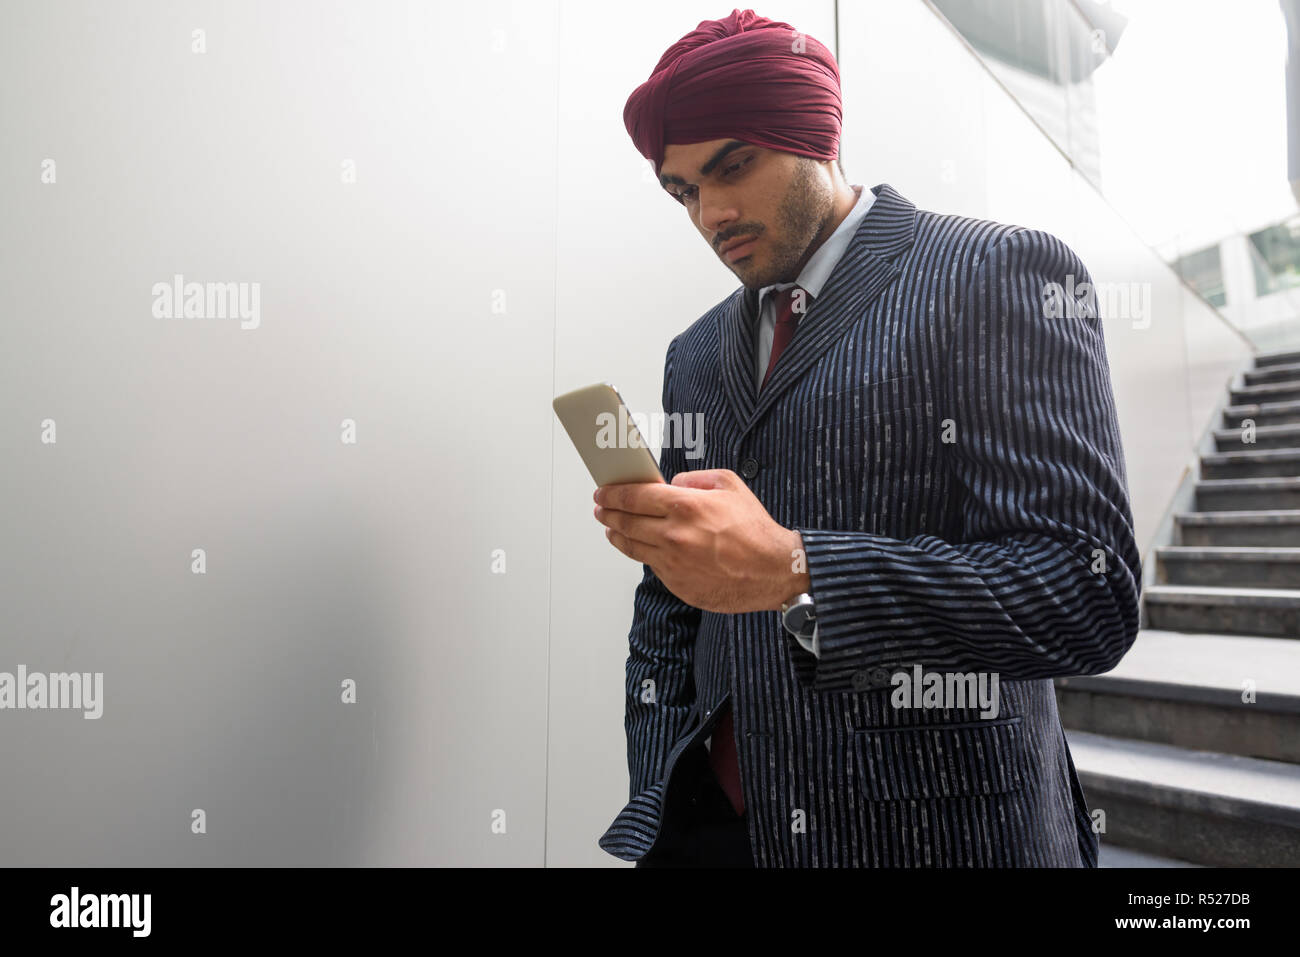 Portrait of Indian businessman with turban outdoors in city using phone Stock Photo